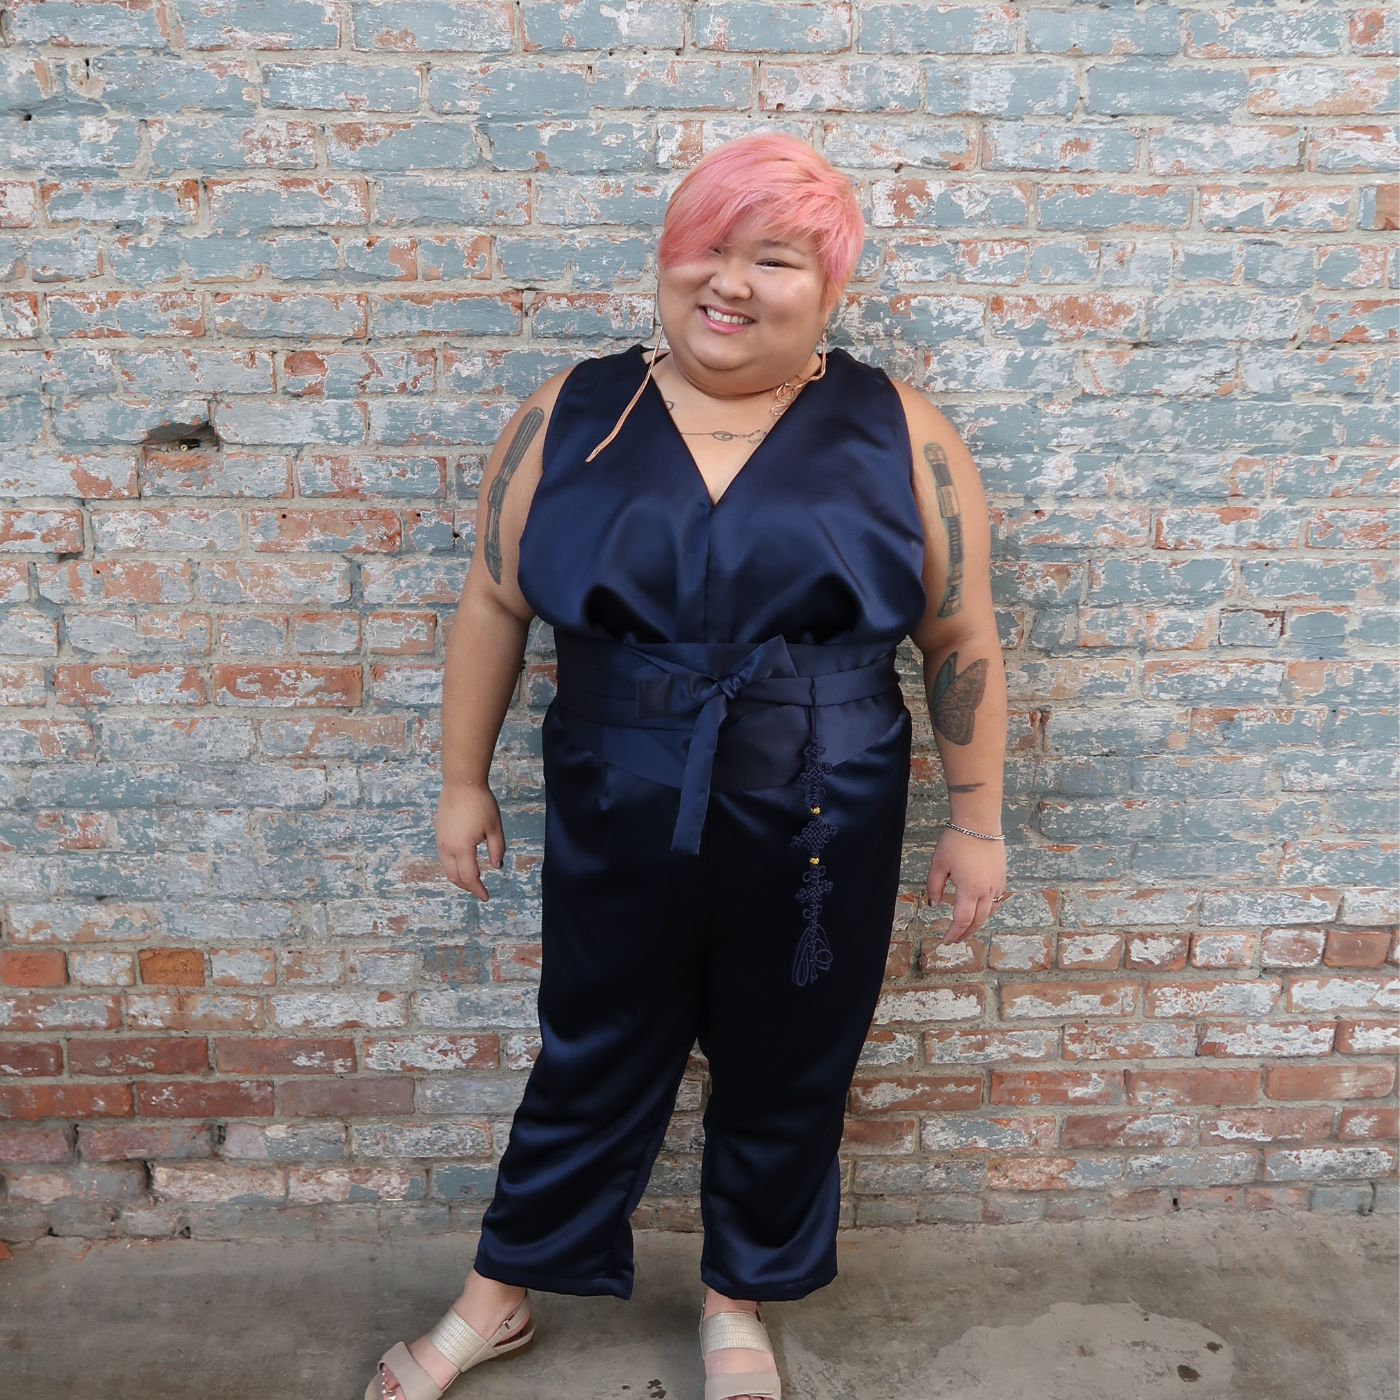 Teukie stands against a red brick wall painted gray, which is chipped and fading. They are smiling at the camera and wearing a shiny navy jumpsuit and gray sandals. Their arms are at their sides.